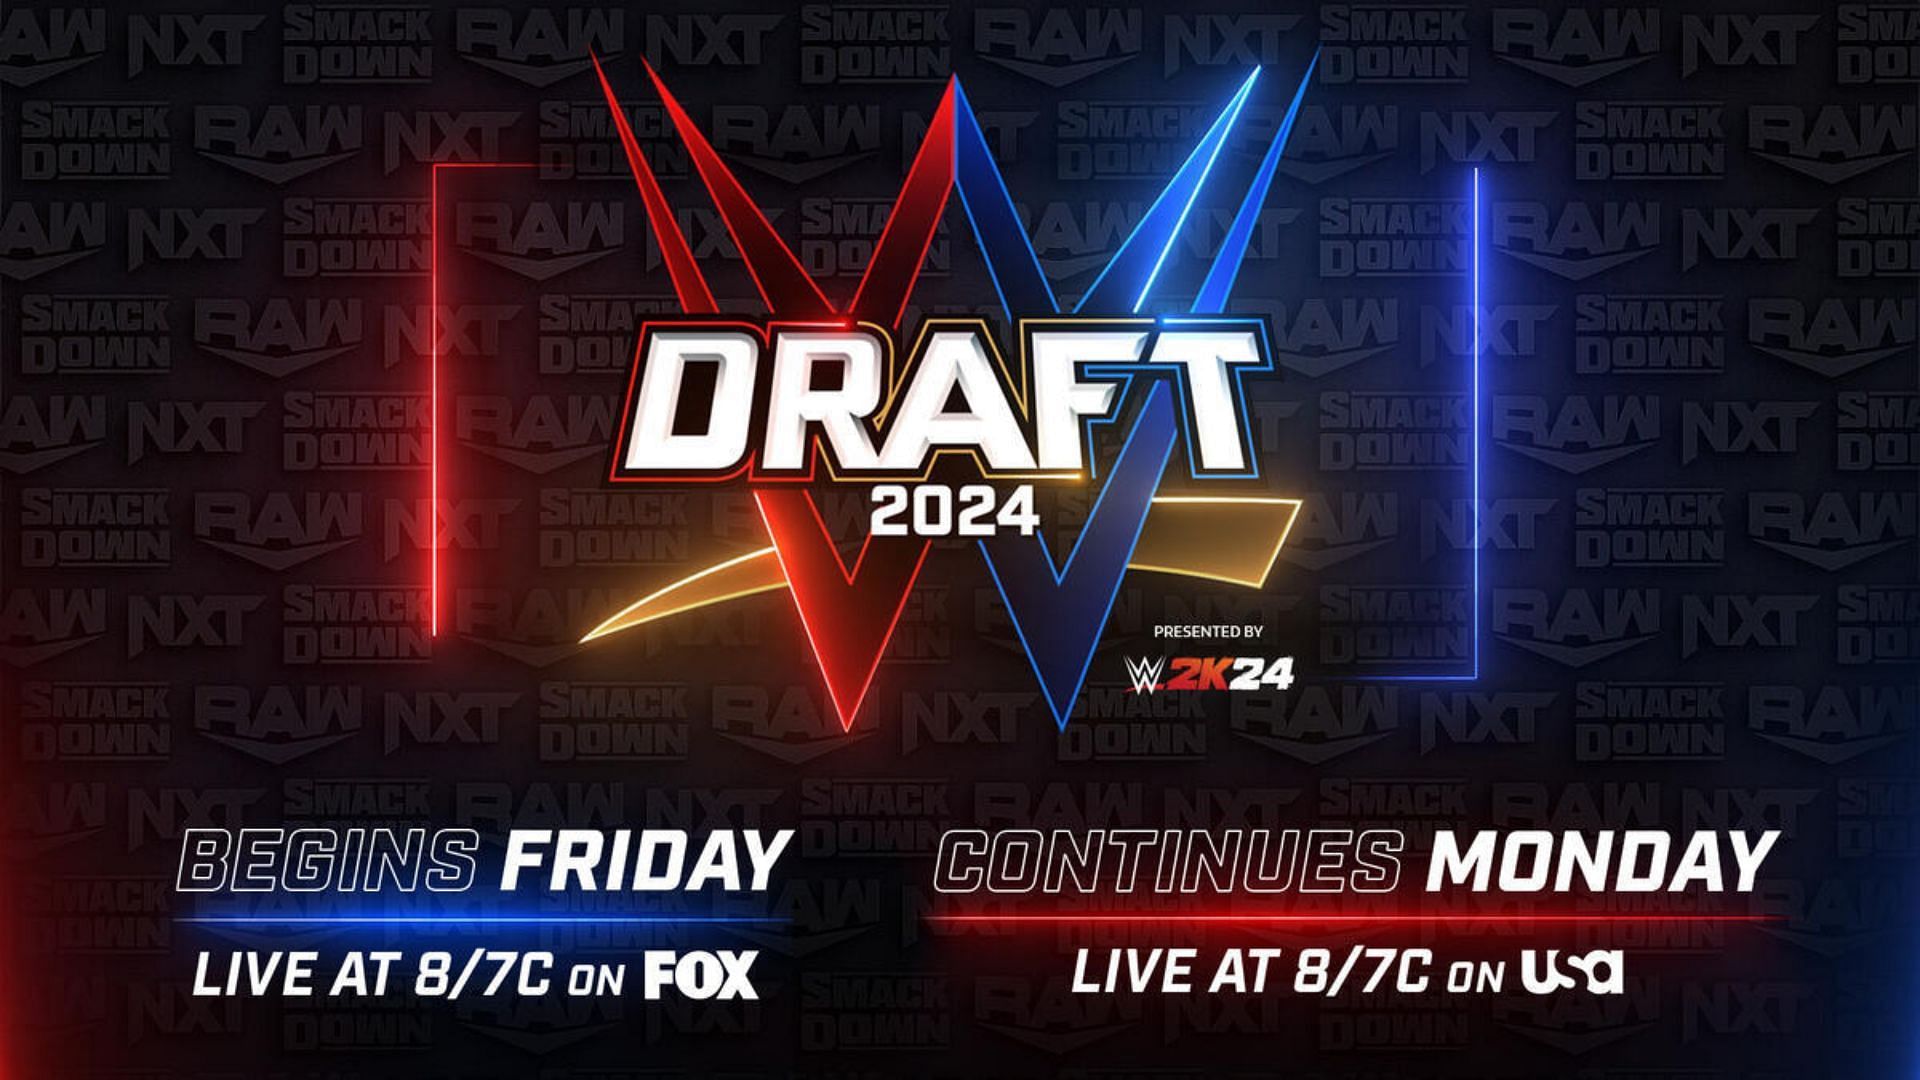 The WWE Draft has changed the landscape of the company.